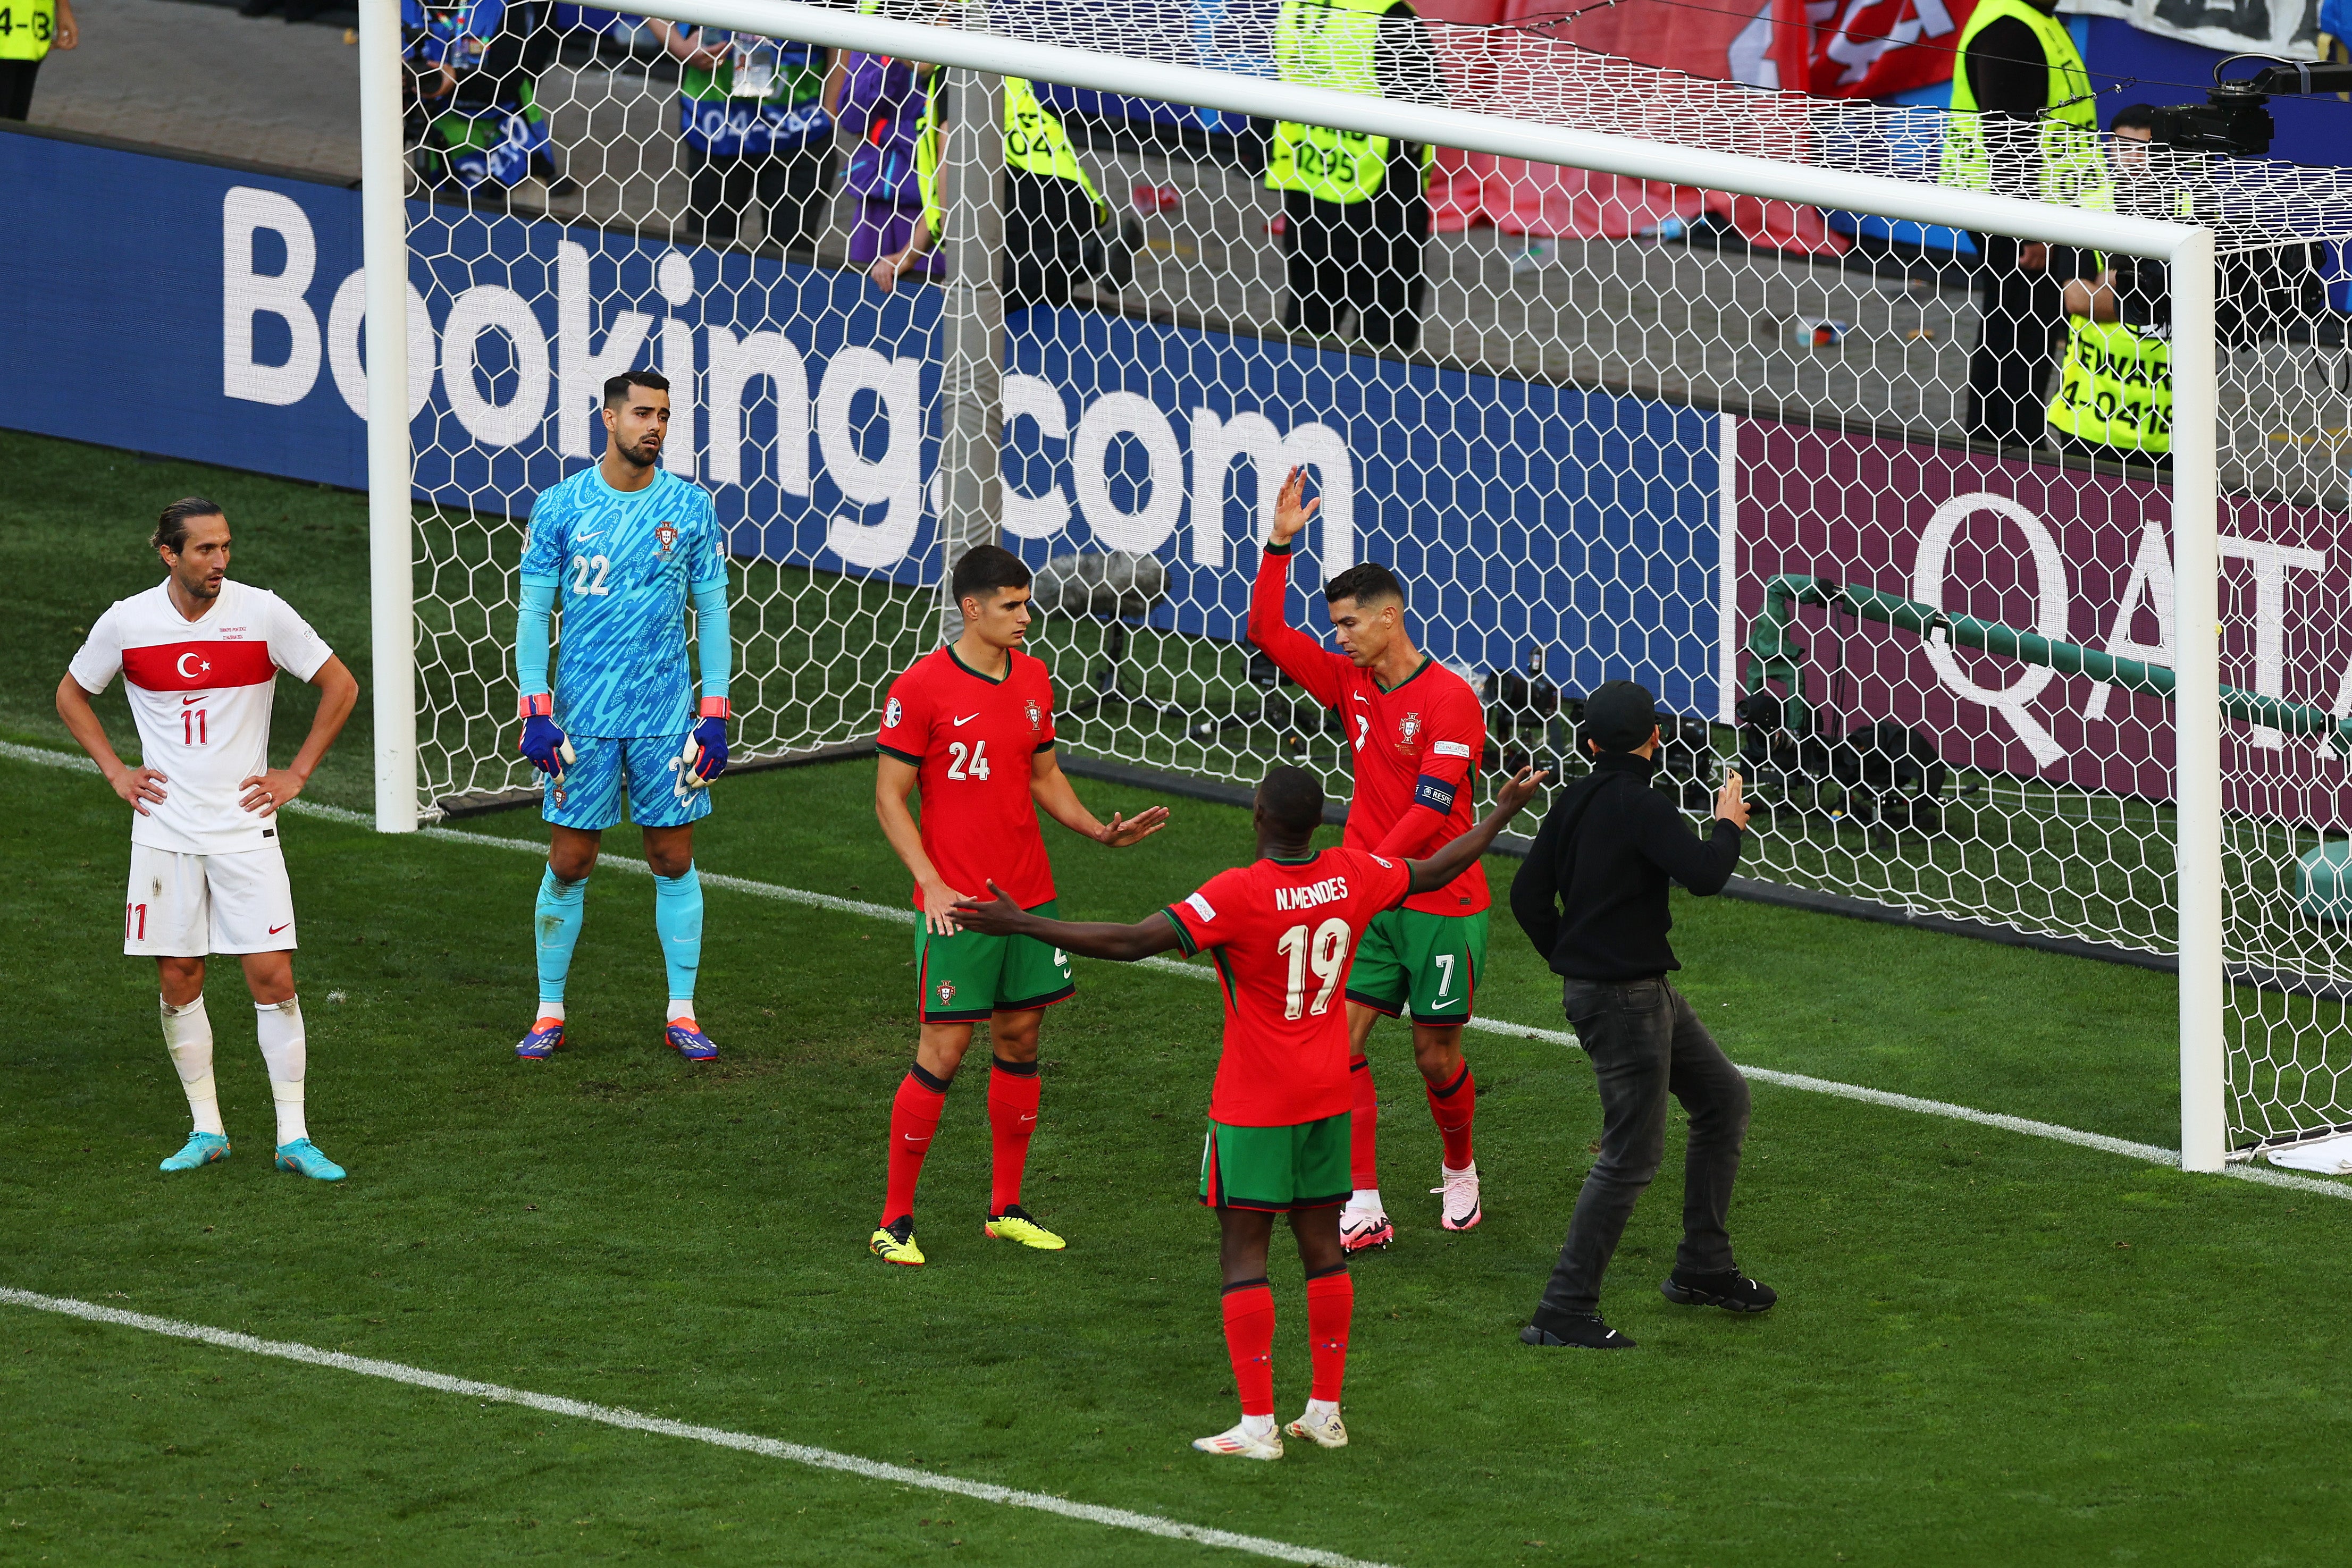 One fan reached Ronaldo at a corner as chaotic scenes marred the end of the game